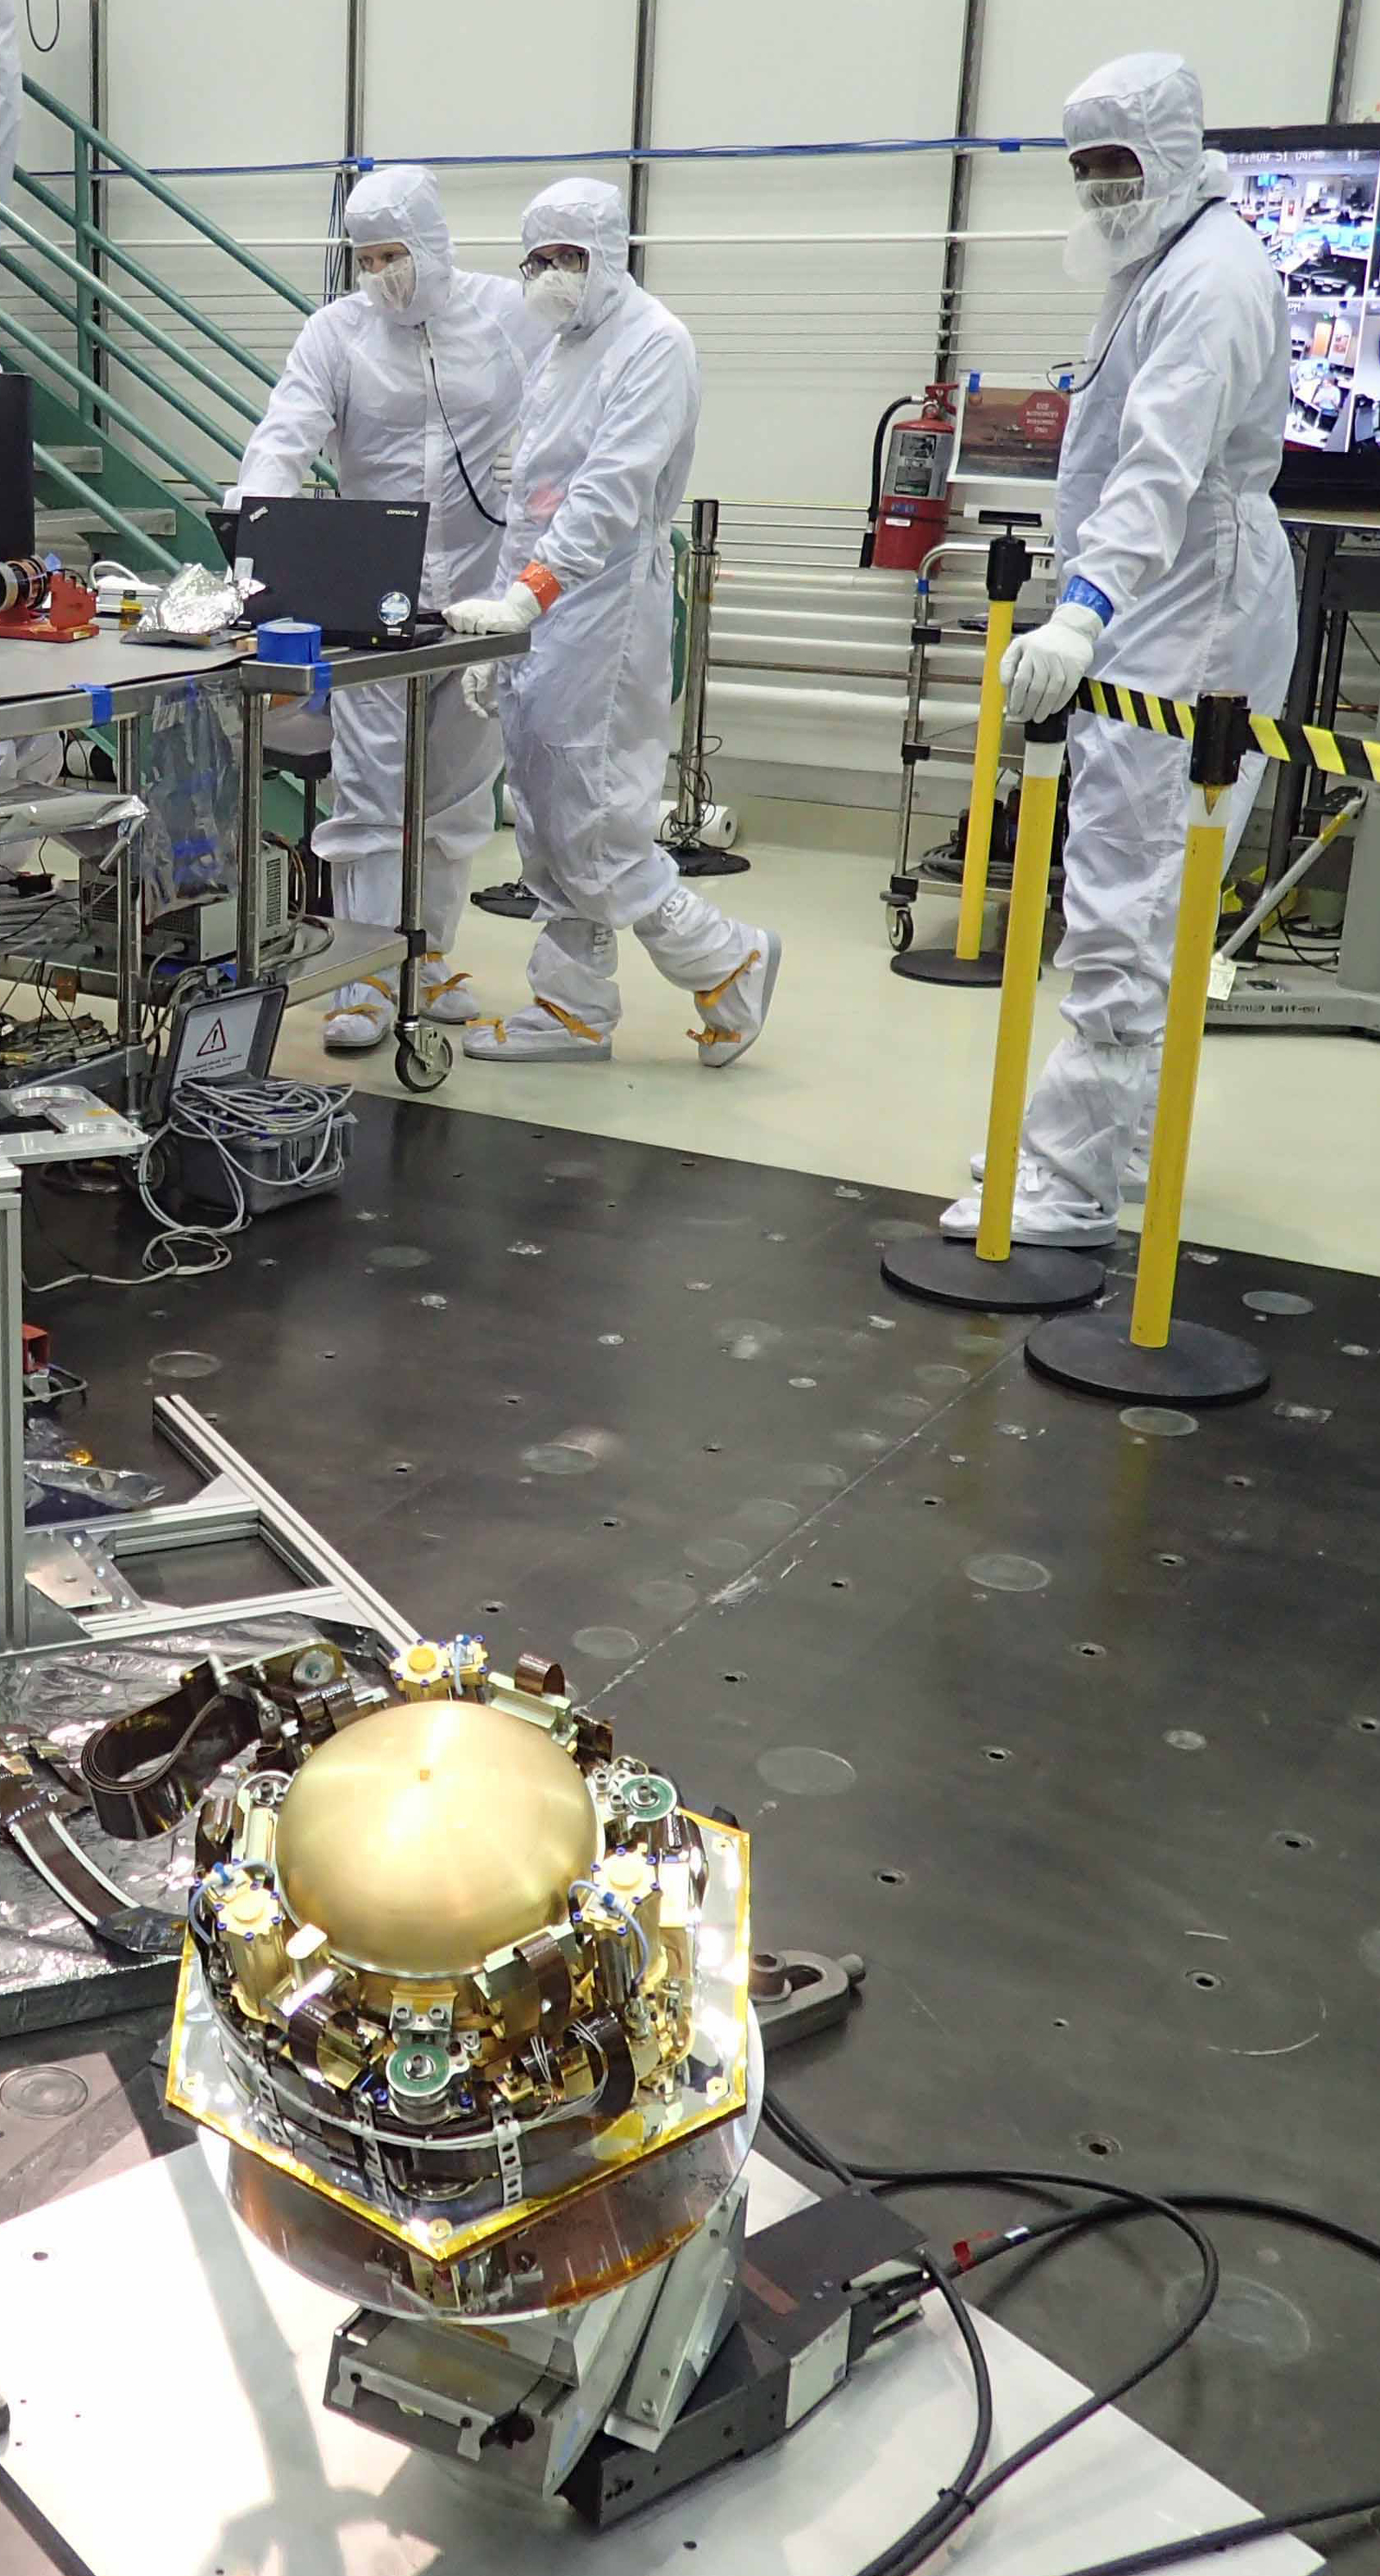 The Seismic Experiment for Interior Structure (SEIS) instrument for NASA's InSight mission to Mars undergoes a checkout in this photo taken July 20, 2017, in a Lockheed Martin clean room facility in Colorado. The SEIS was provided by France's national space agency (CNES).